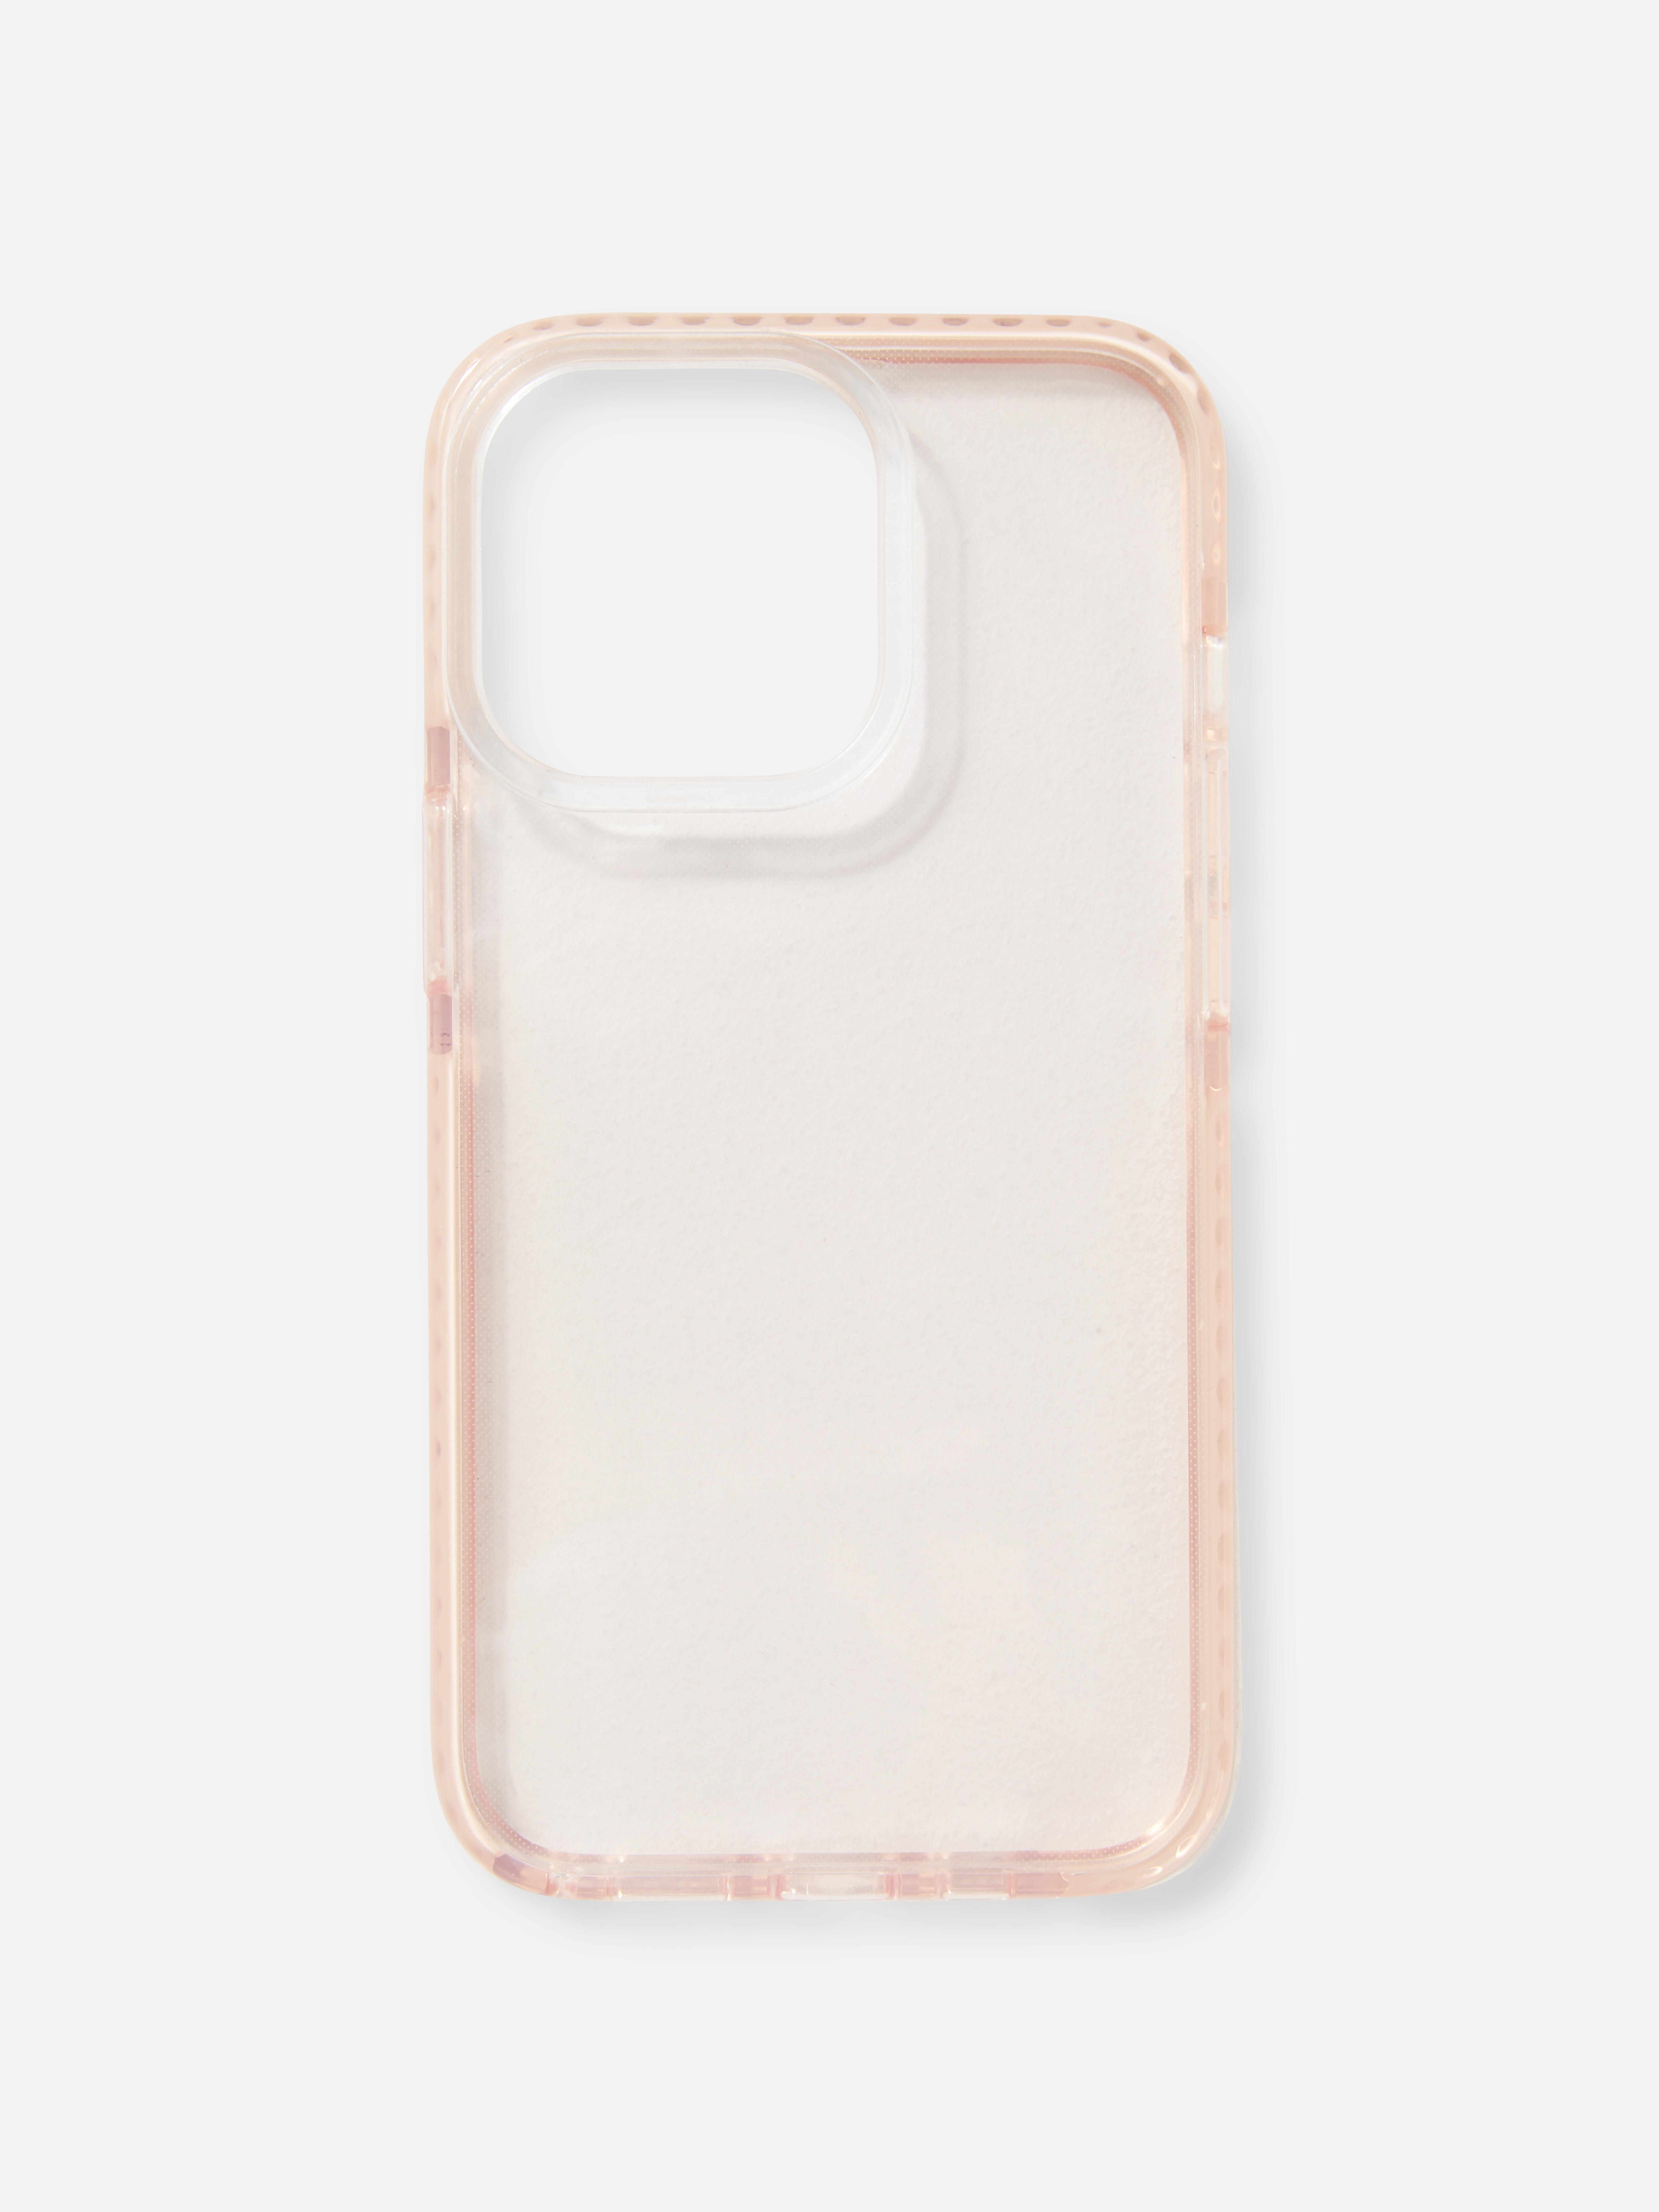 Solid Protective iPhone Case